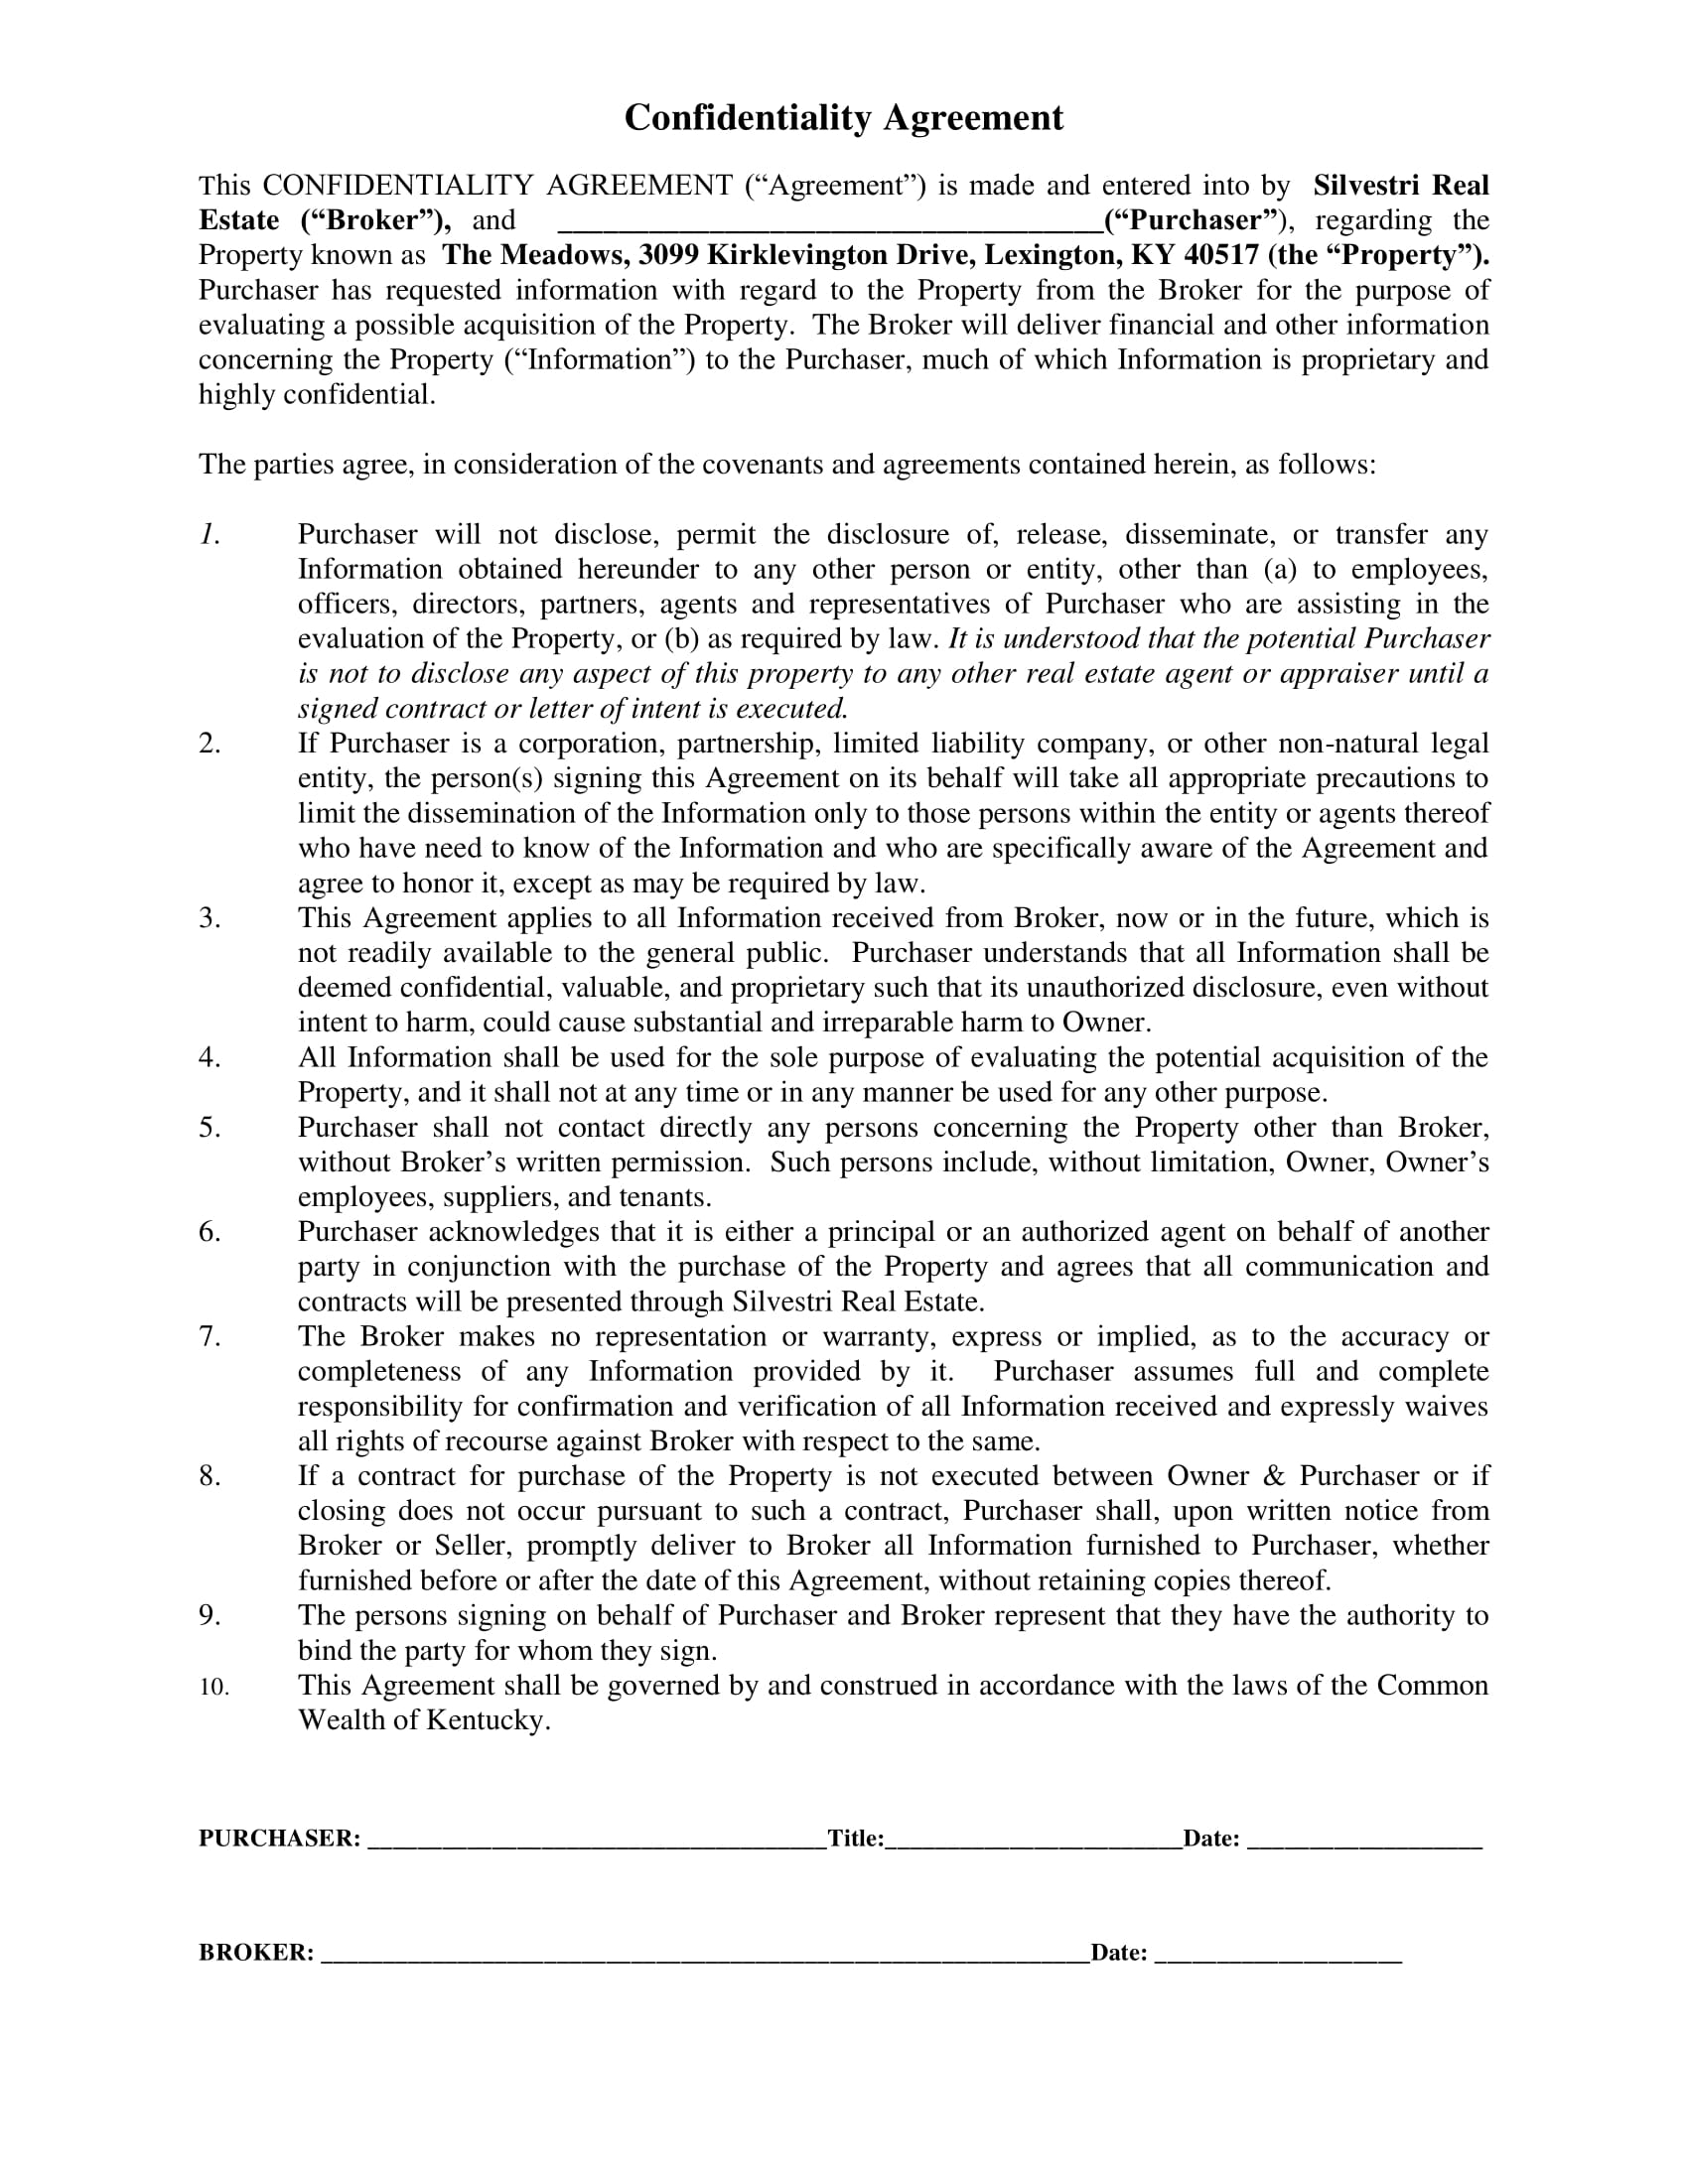 Confidentiality Agreement The Meadows